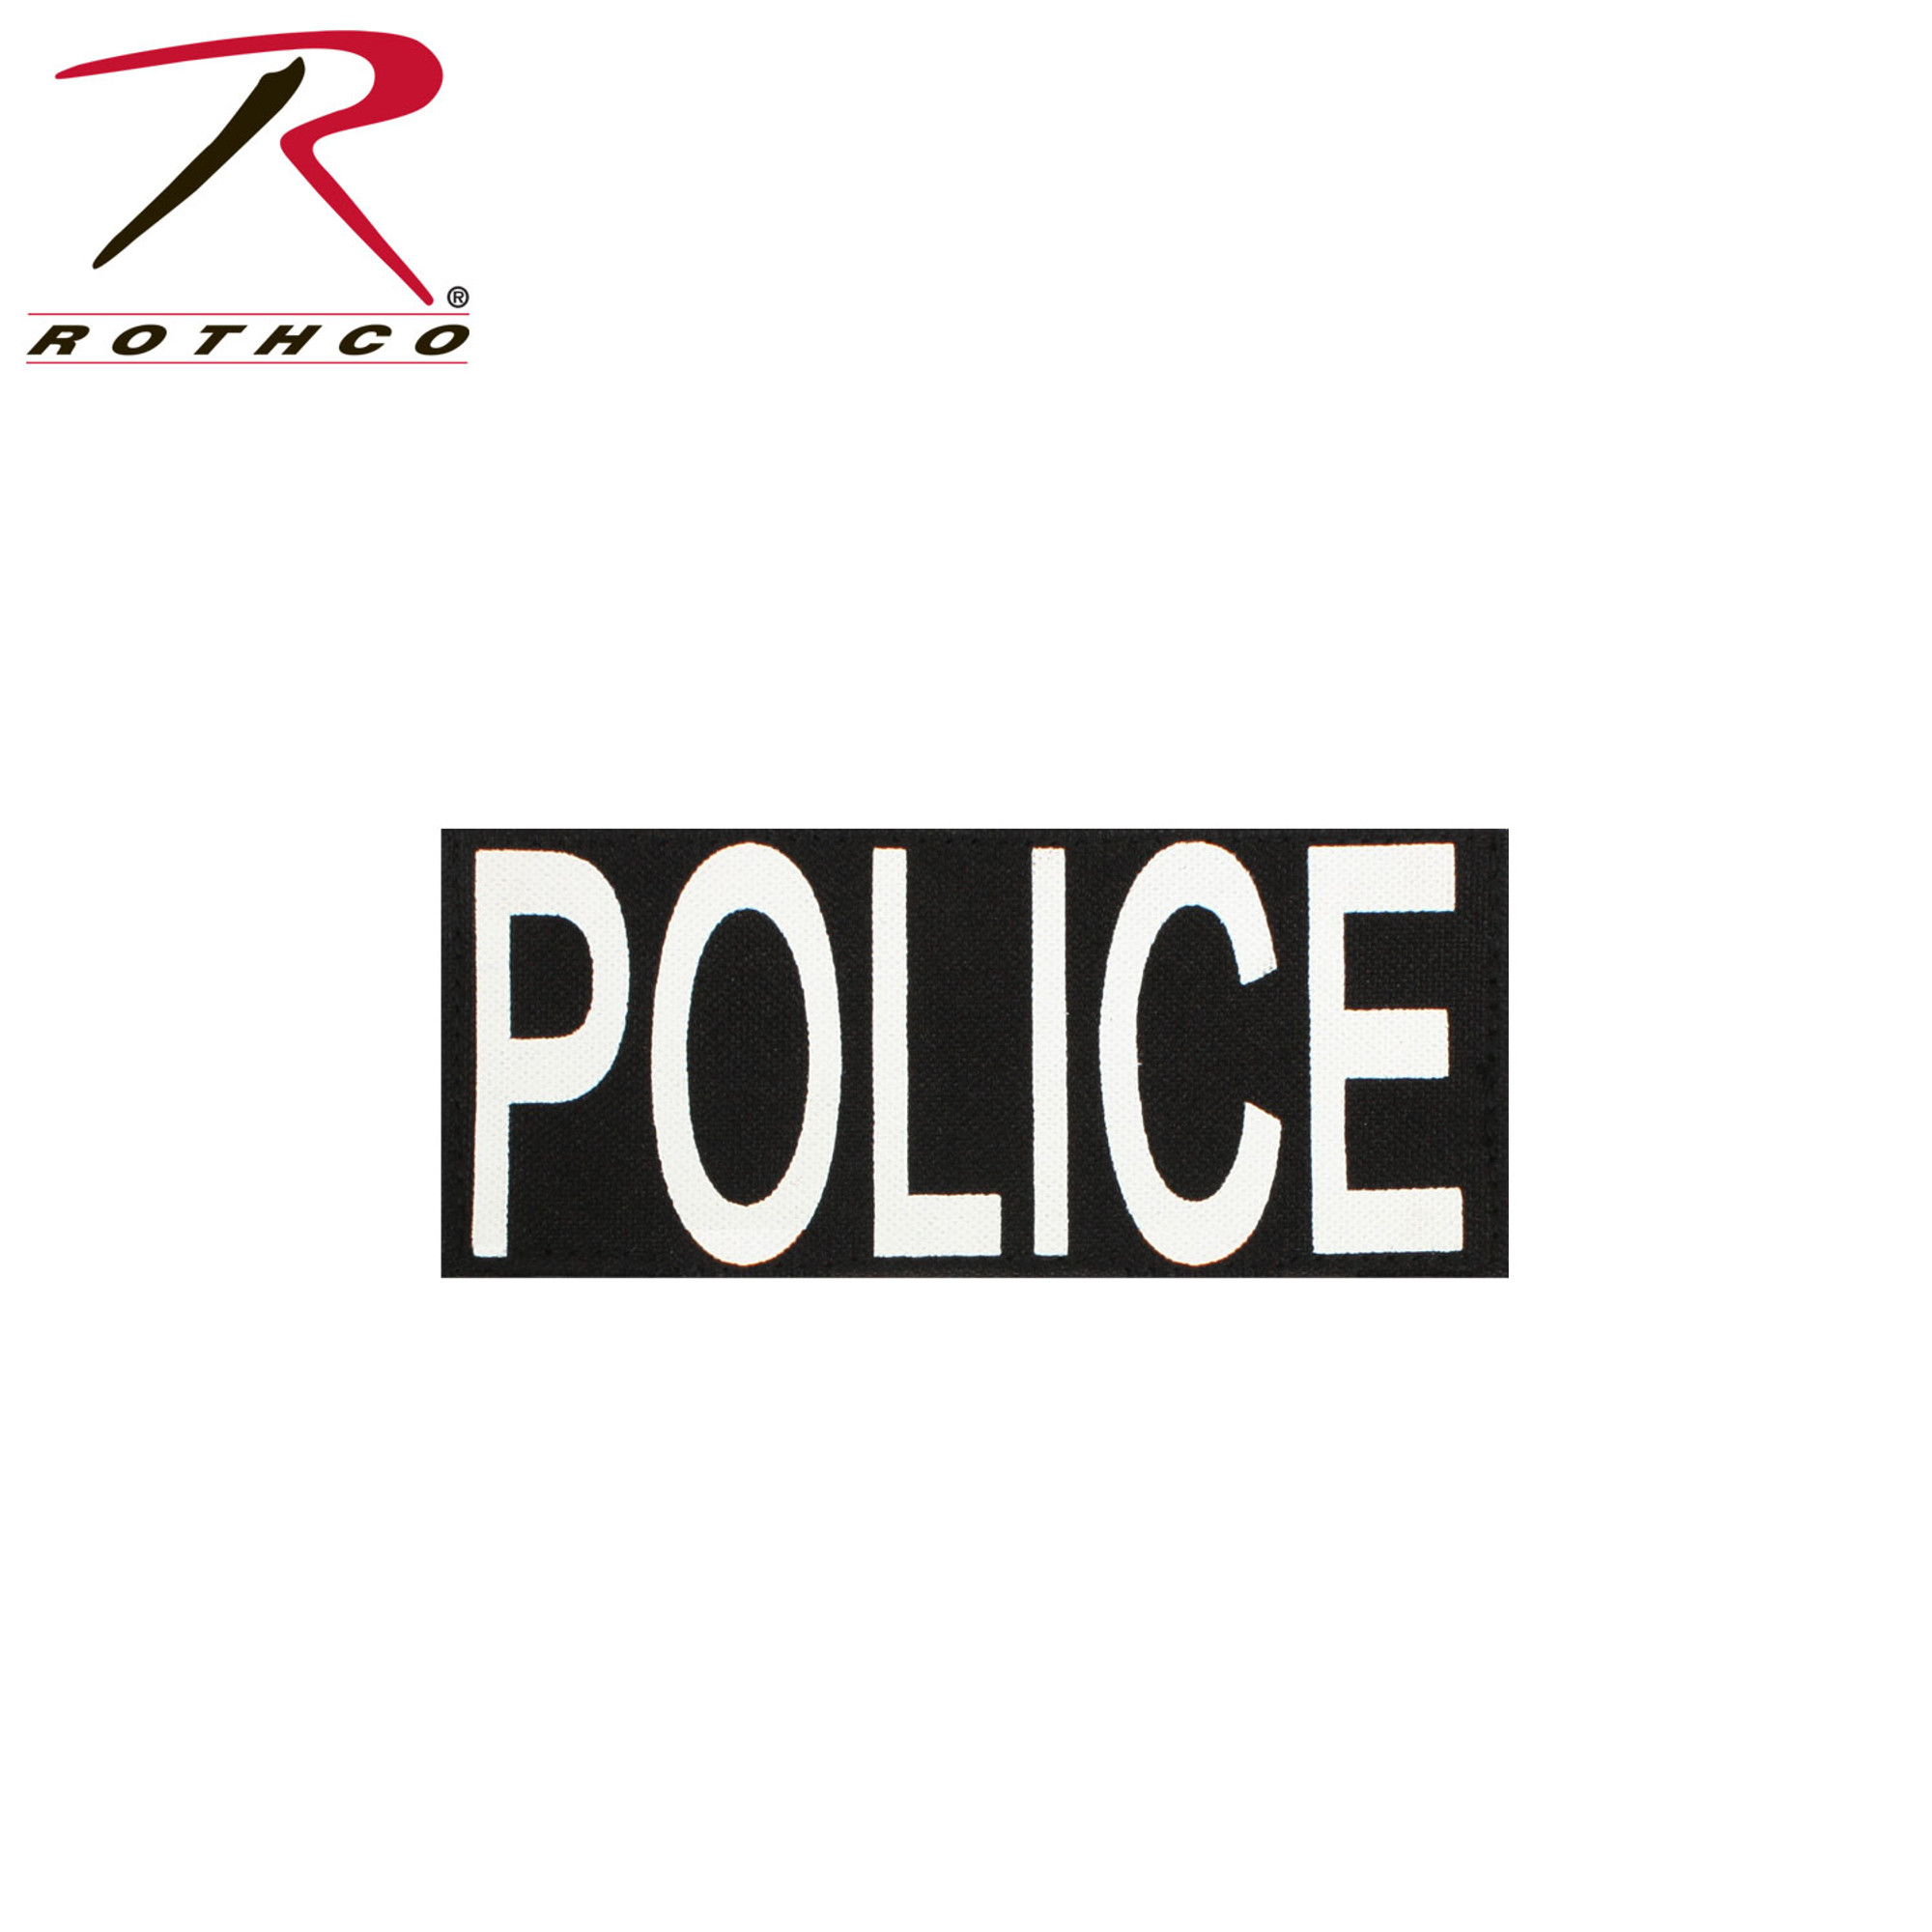 Rothco Police Patch With Hook Back - 4” X 10 ¾”